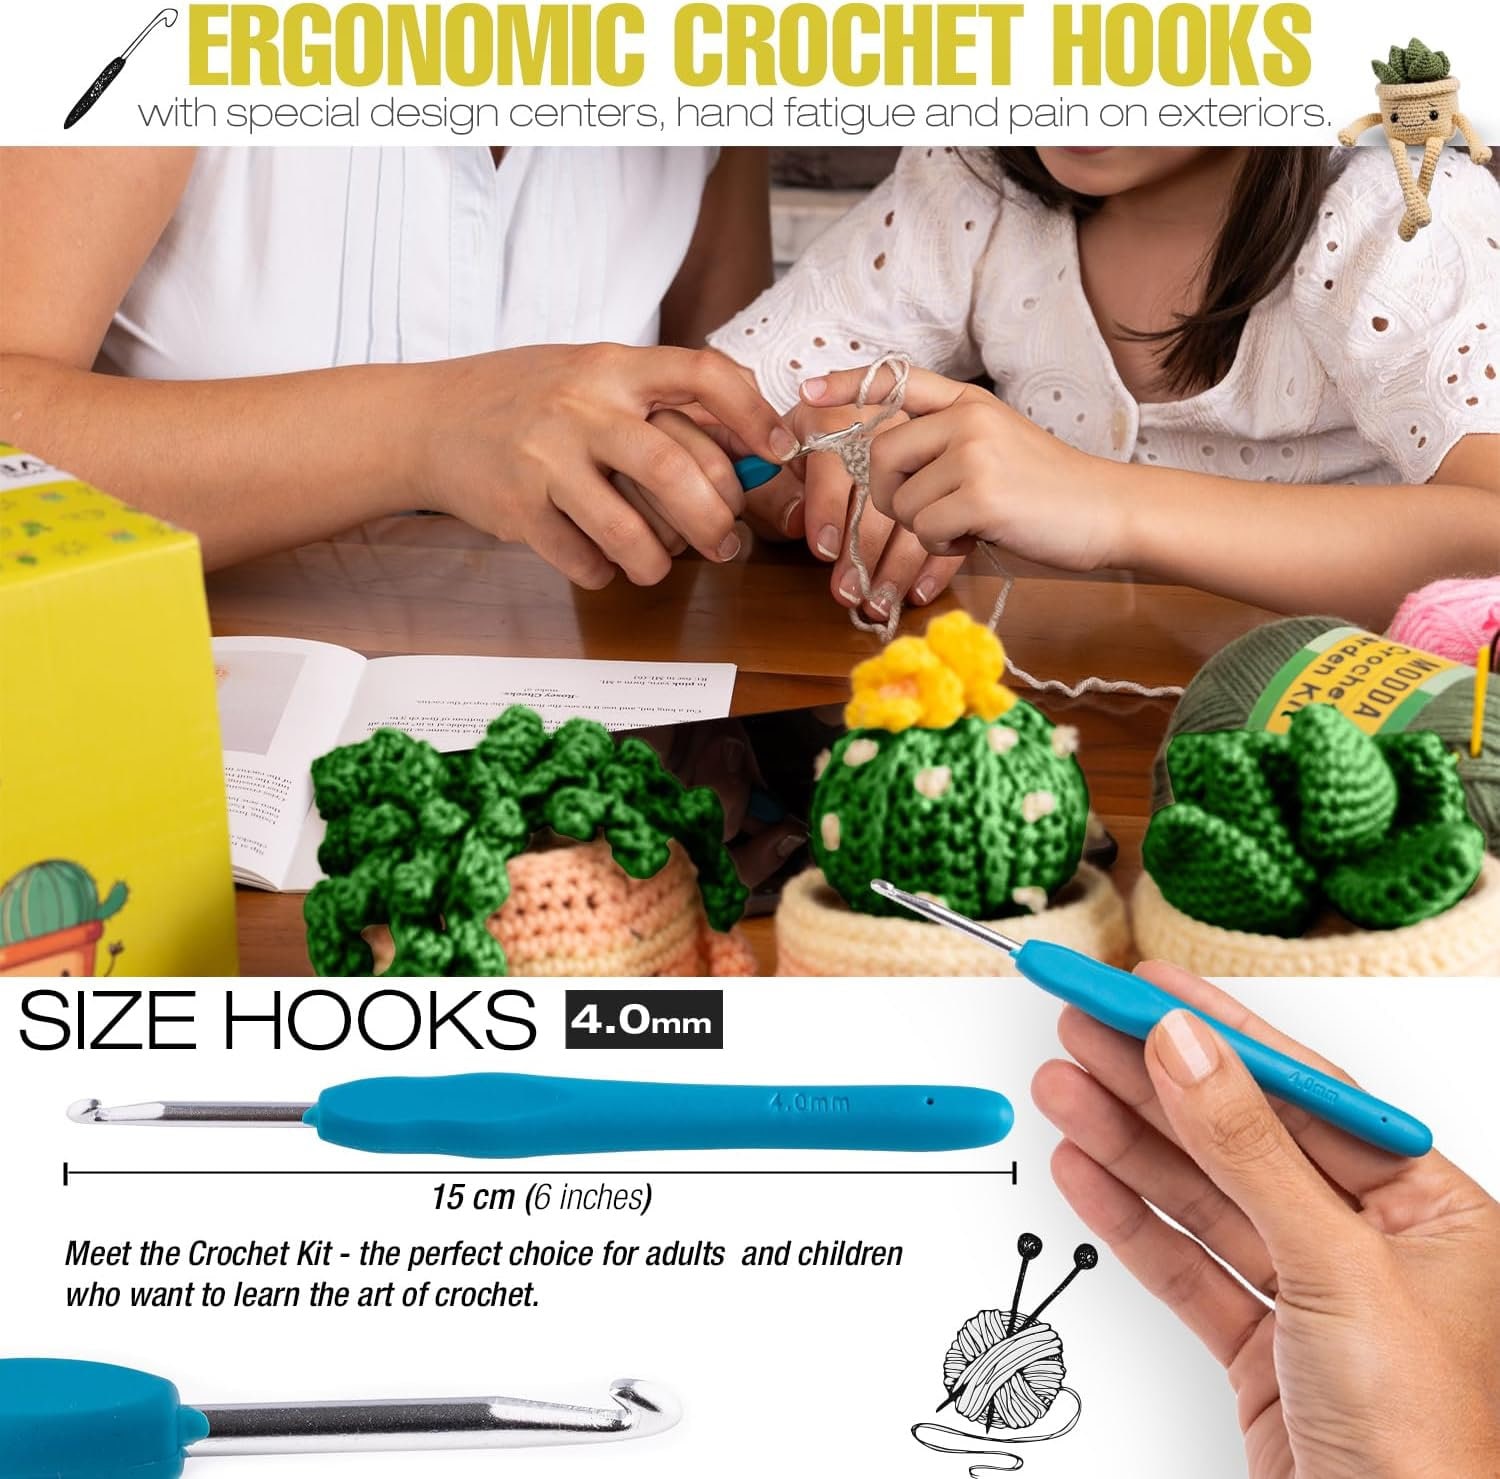 MODDA Crochet Kit for Beginners Adults and Kids - with Video Course - Make  Amigurumi and Crocheting Kit Projects - Beginner Crochet Kit Includes 20